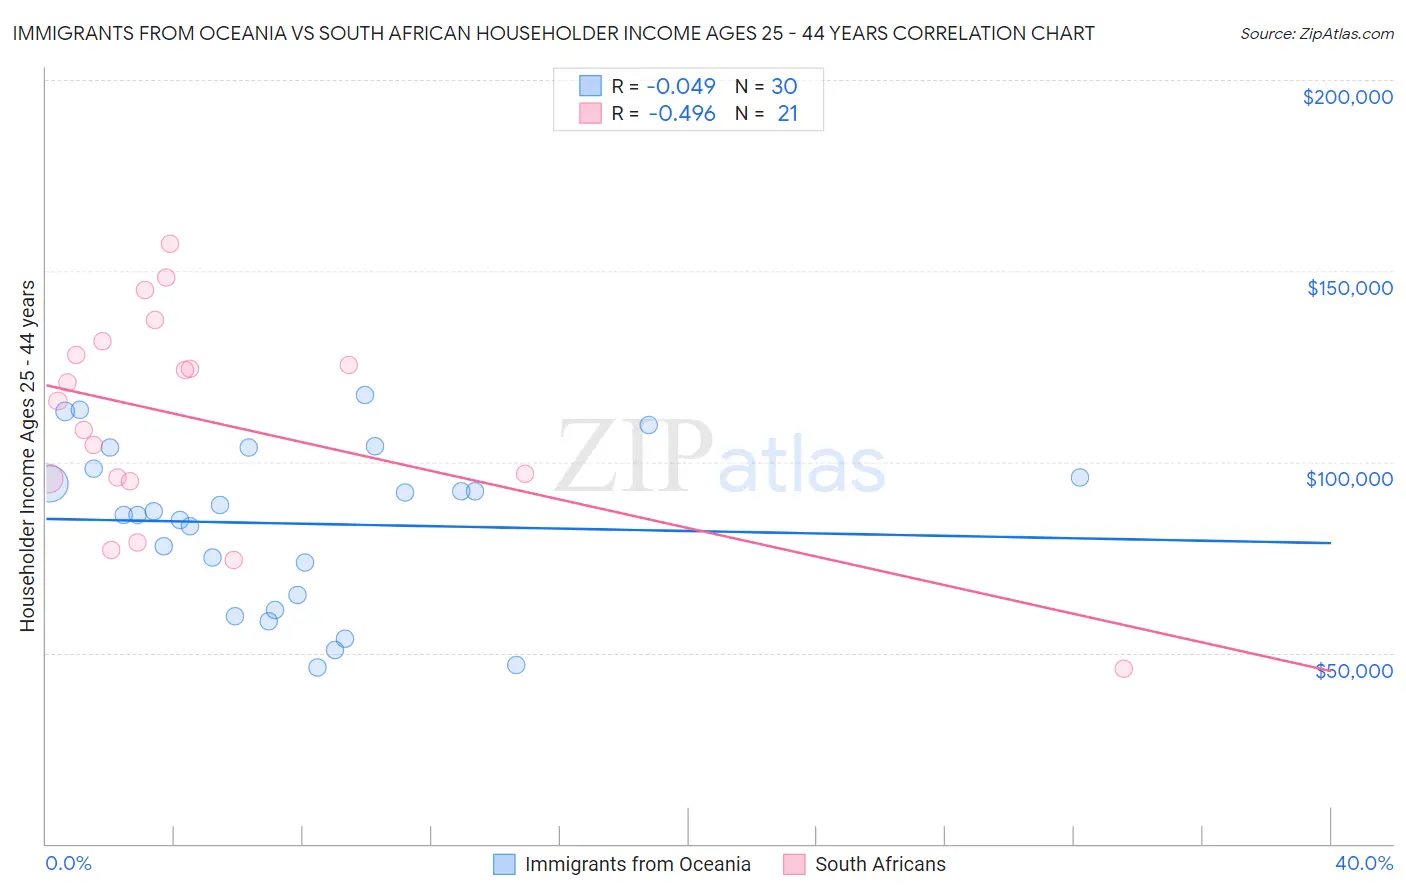 Immigrants from Oceania vs South African Householder Income Ages 25 - 44 years